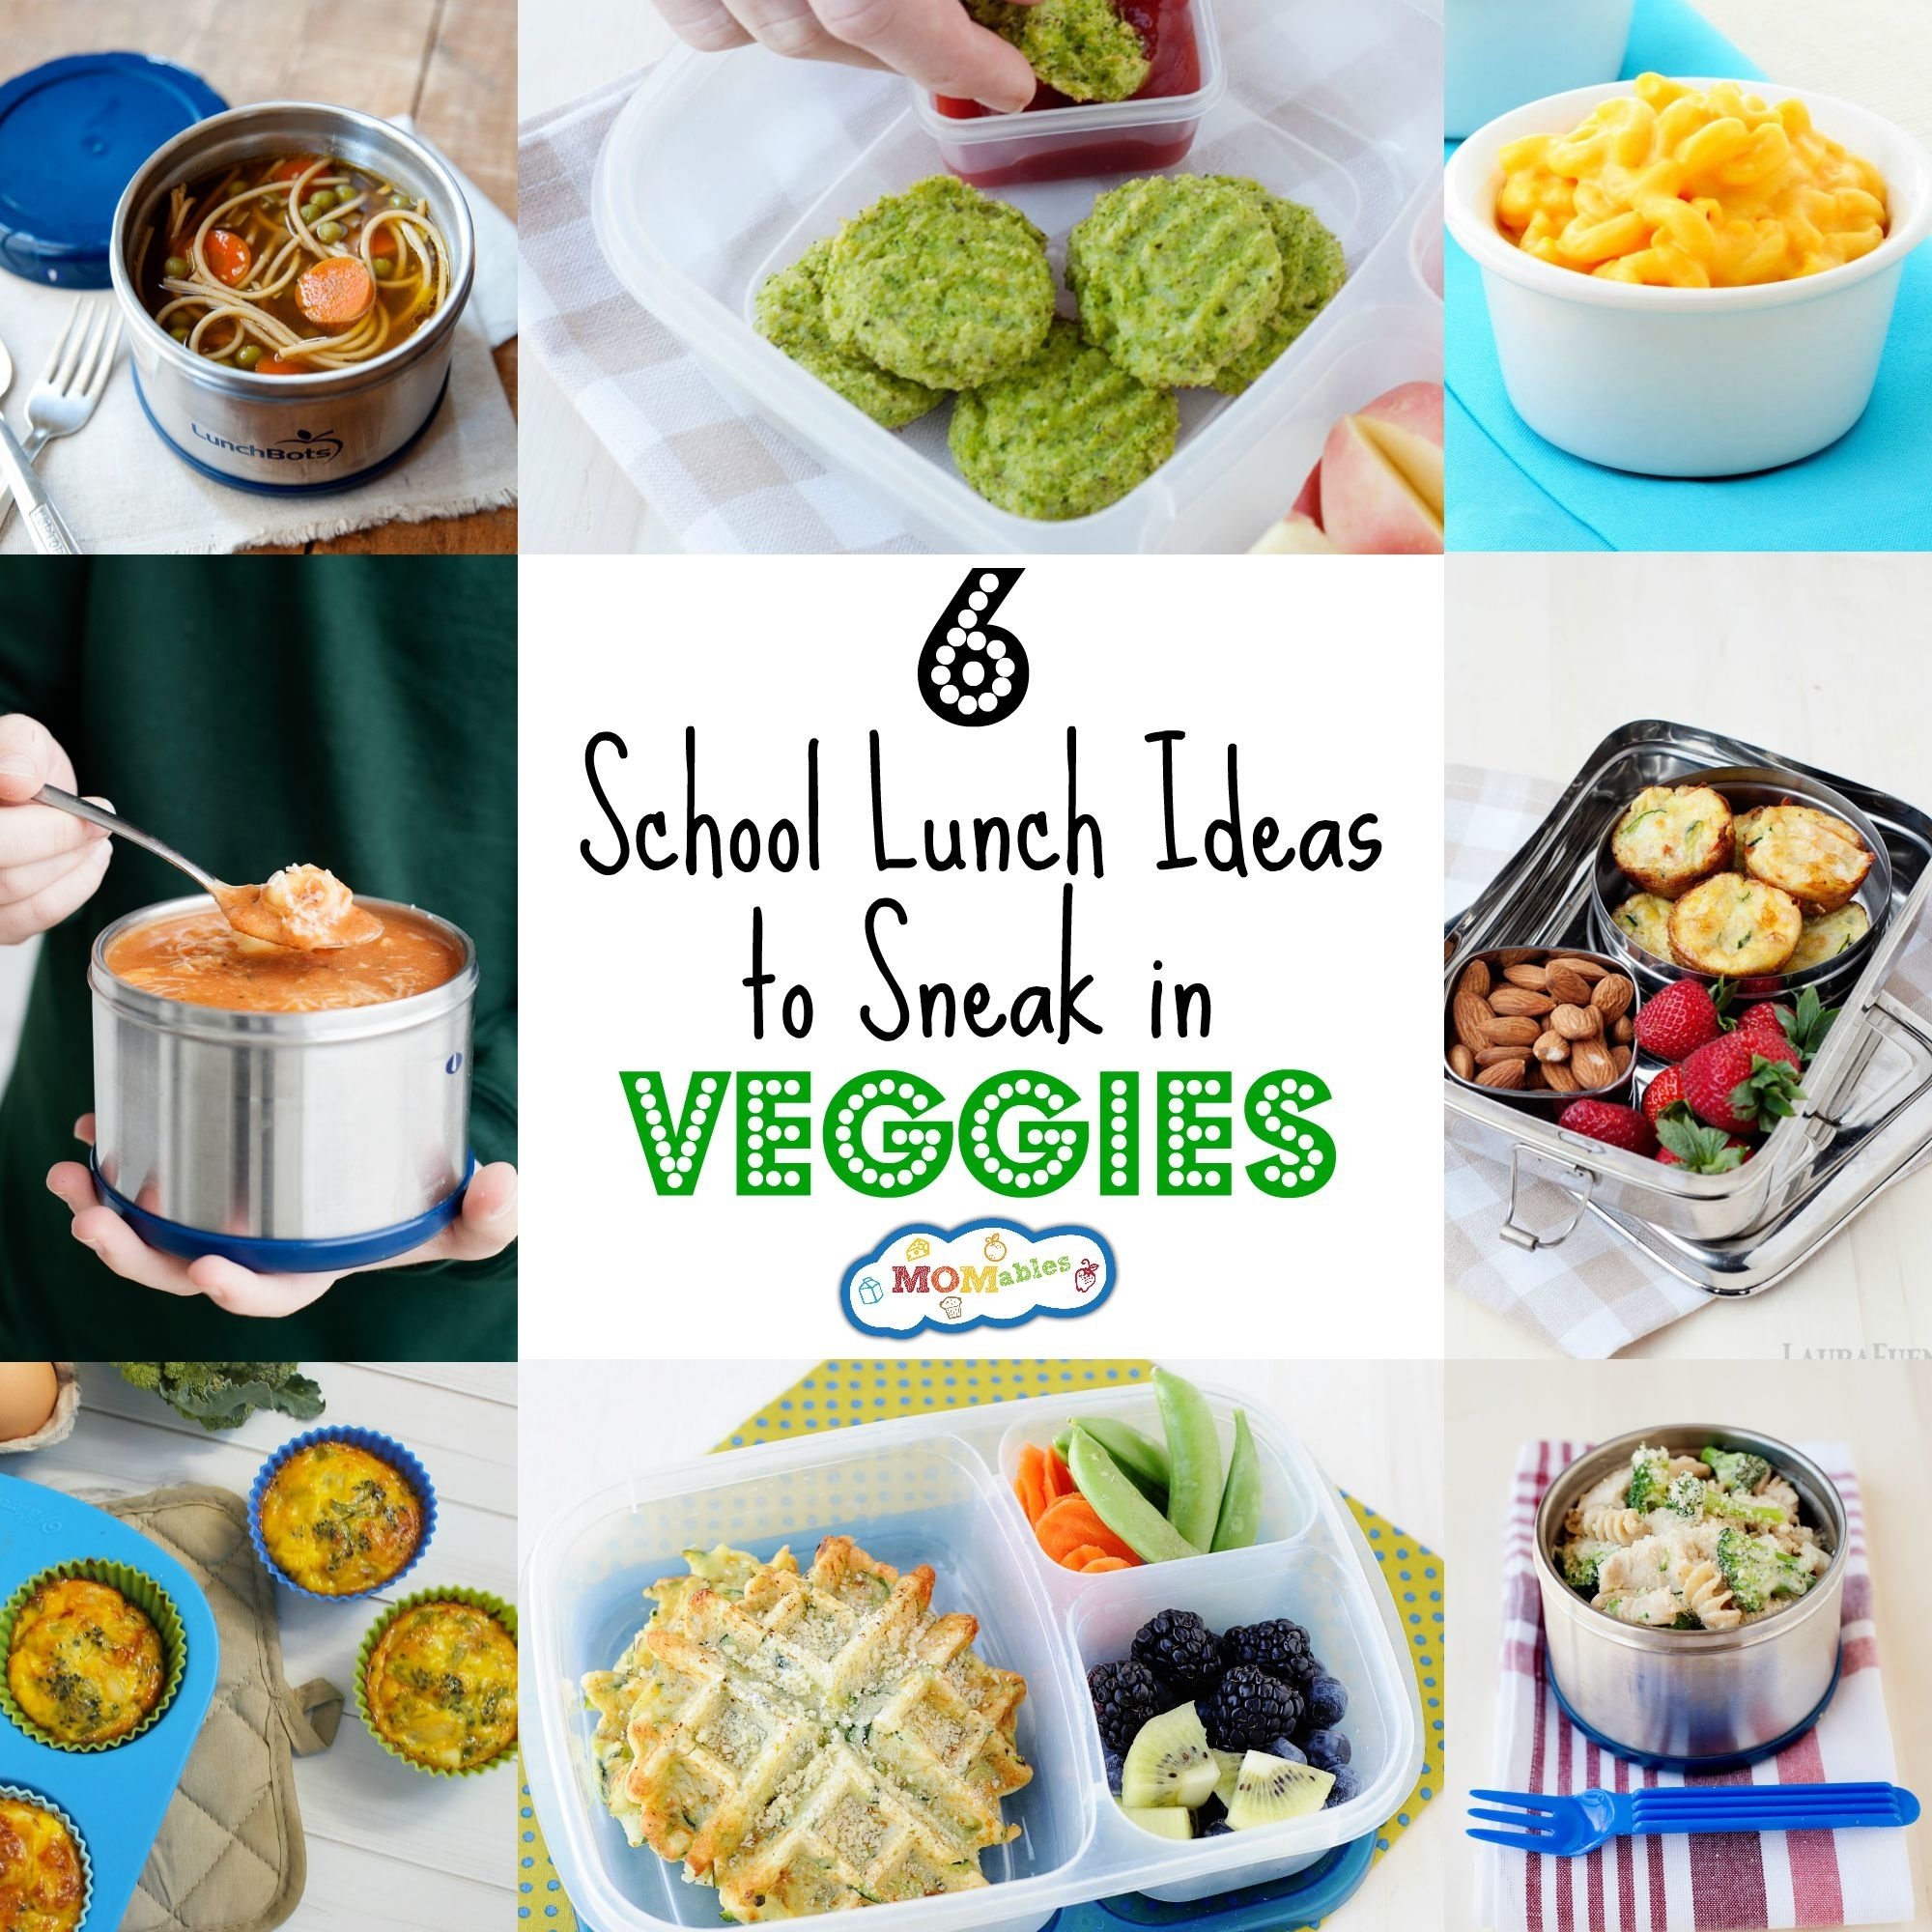 10 Cute Toddler Lunch Ideas For School 6 school lunch ideas to sneak in veggies momables good food 1 2022